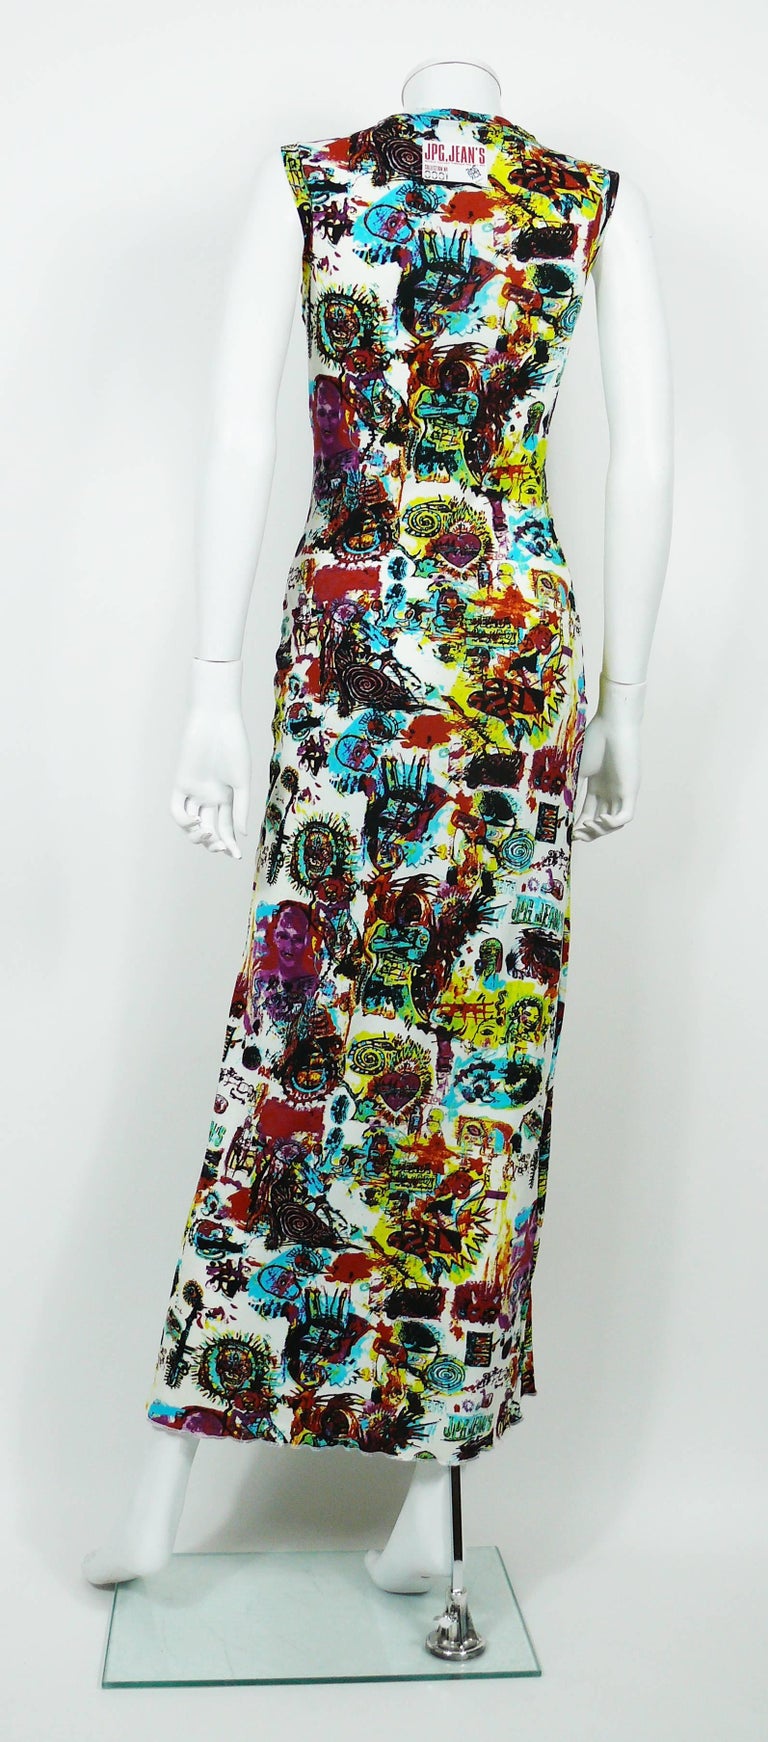 Jean Paul Gaultier Vintage Basquiat Print Inspired Maxi Dress Size S at ...